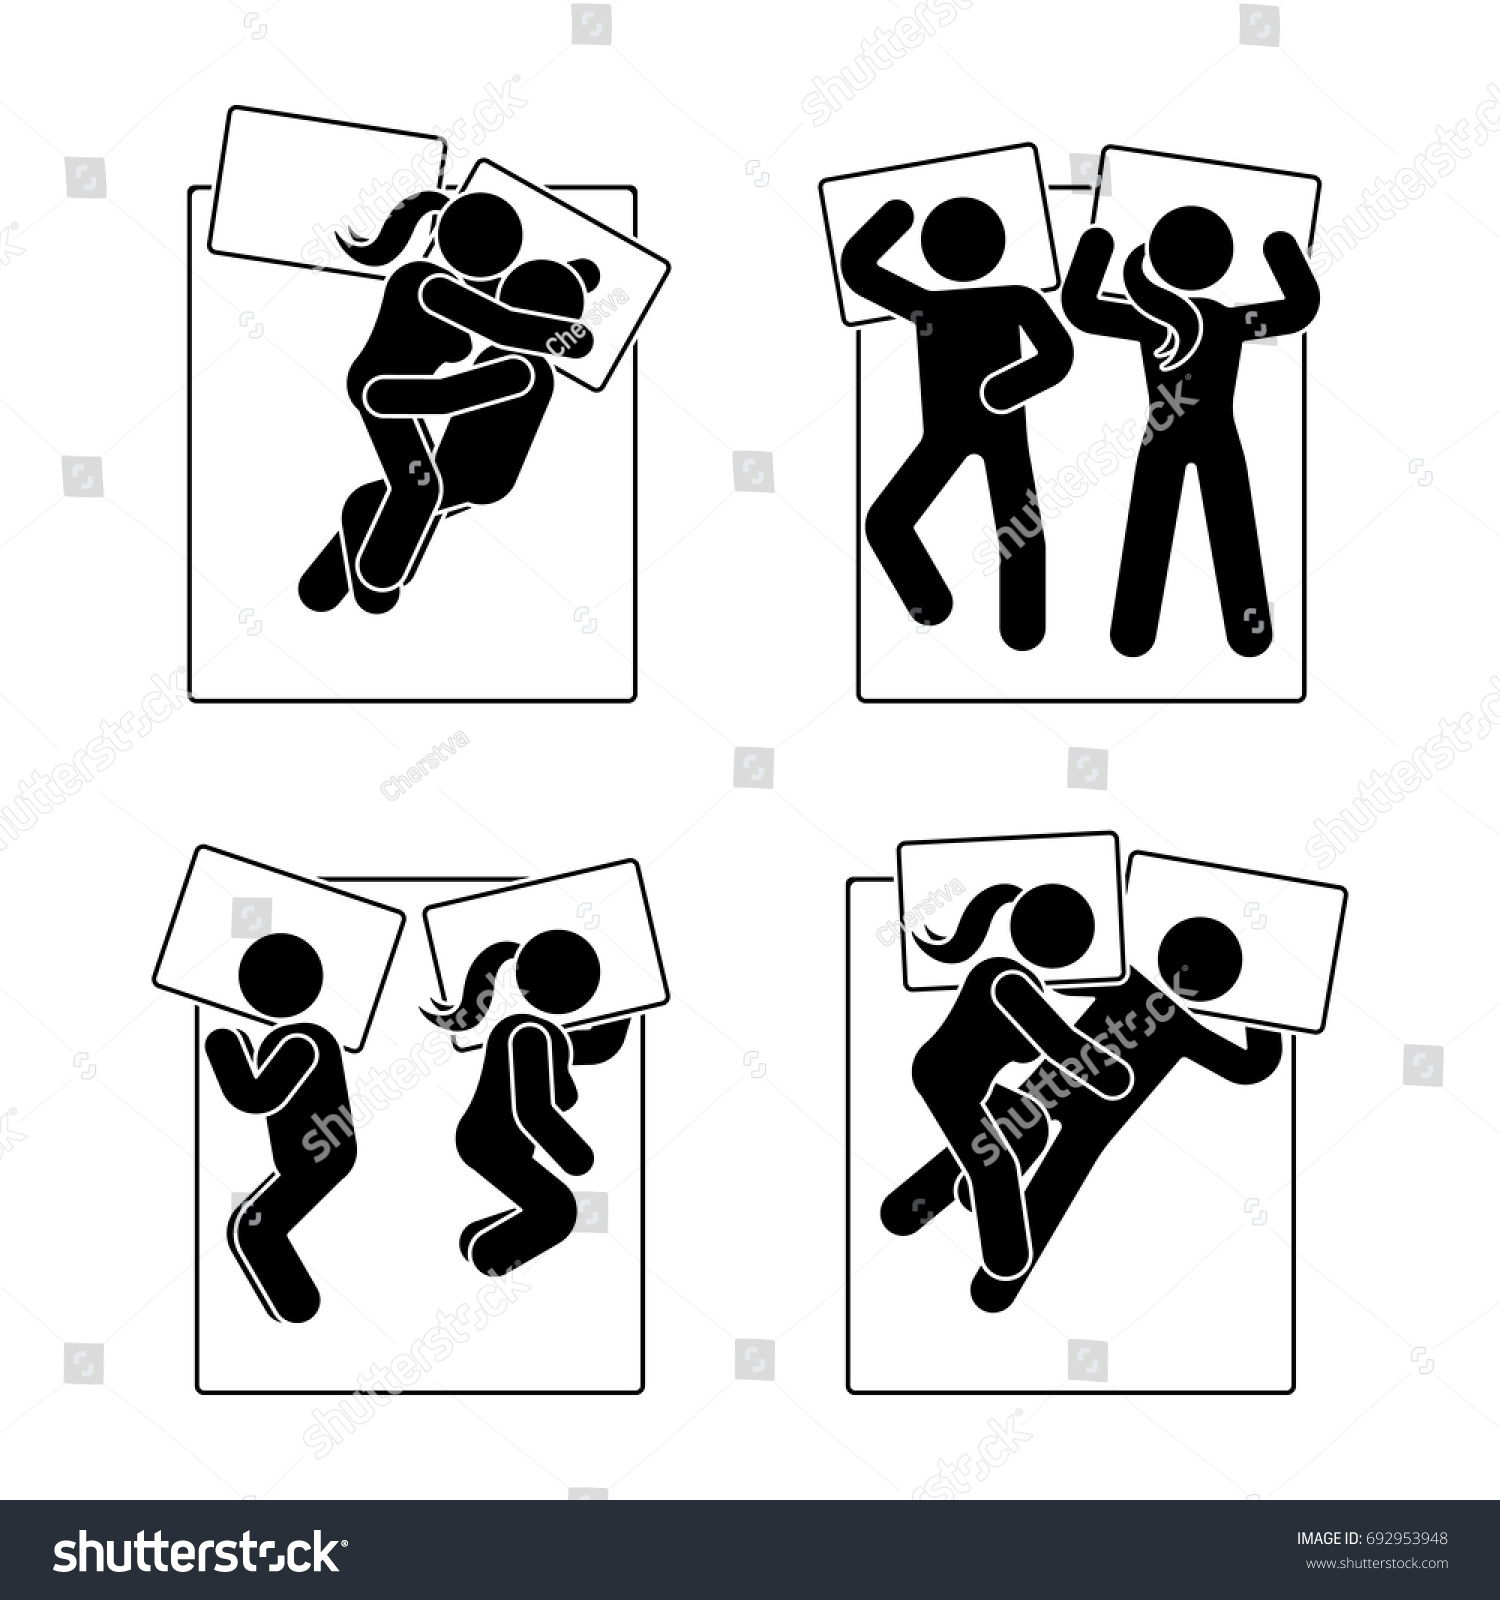 Stick Figure Different Sleeping Position Set Stock Vector Royalty Free 692953948